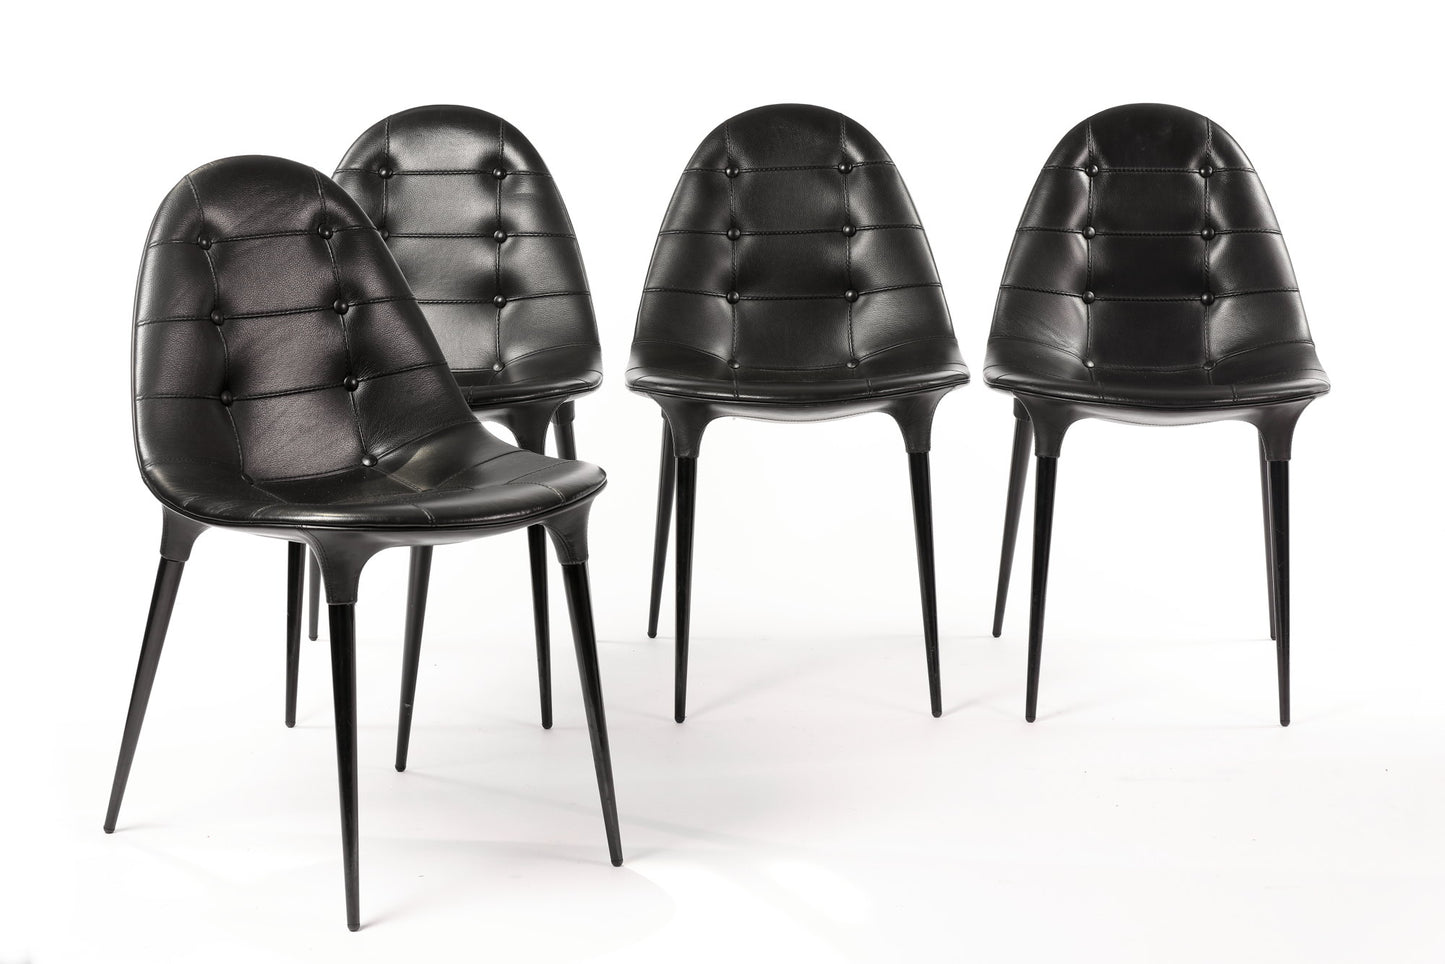 4 Cassina Caprice chairs designed by Philippe Starck